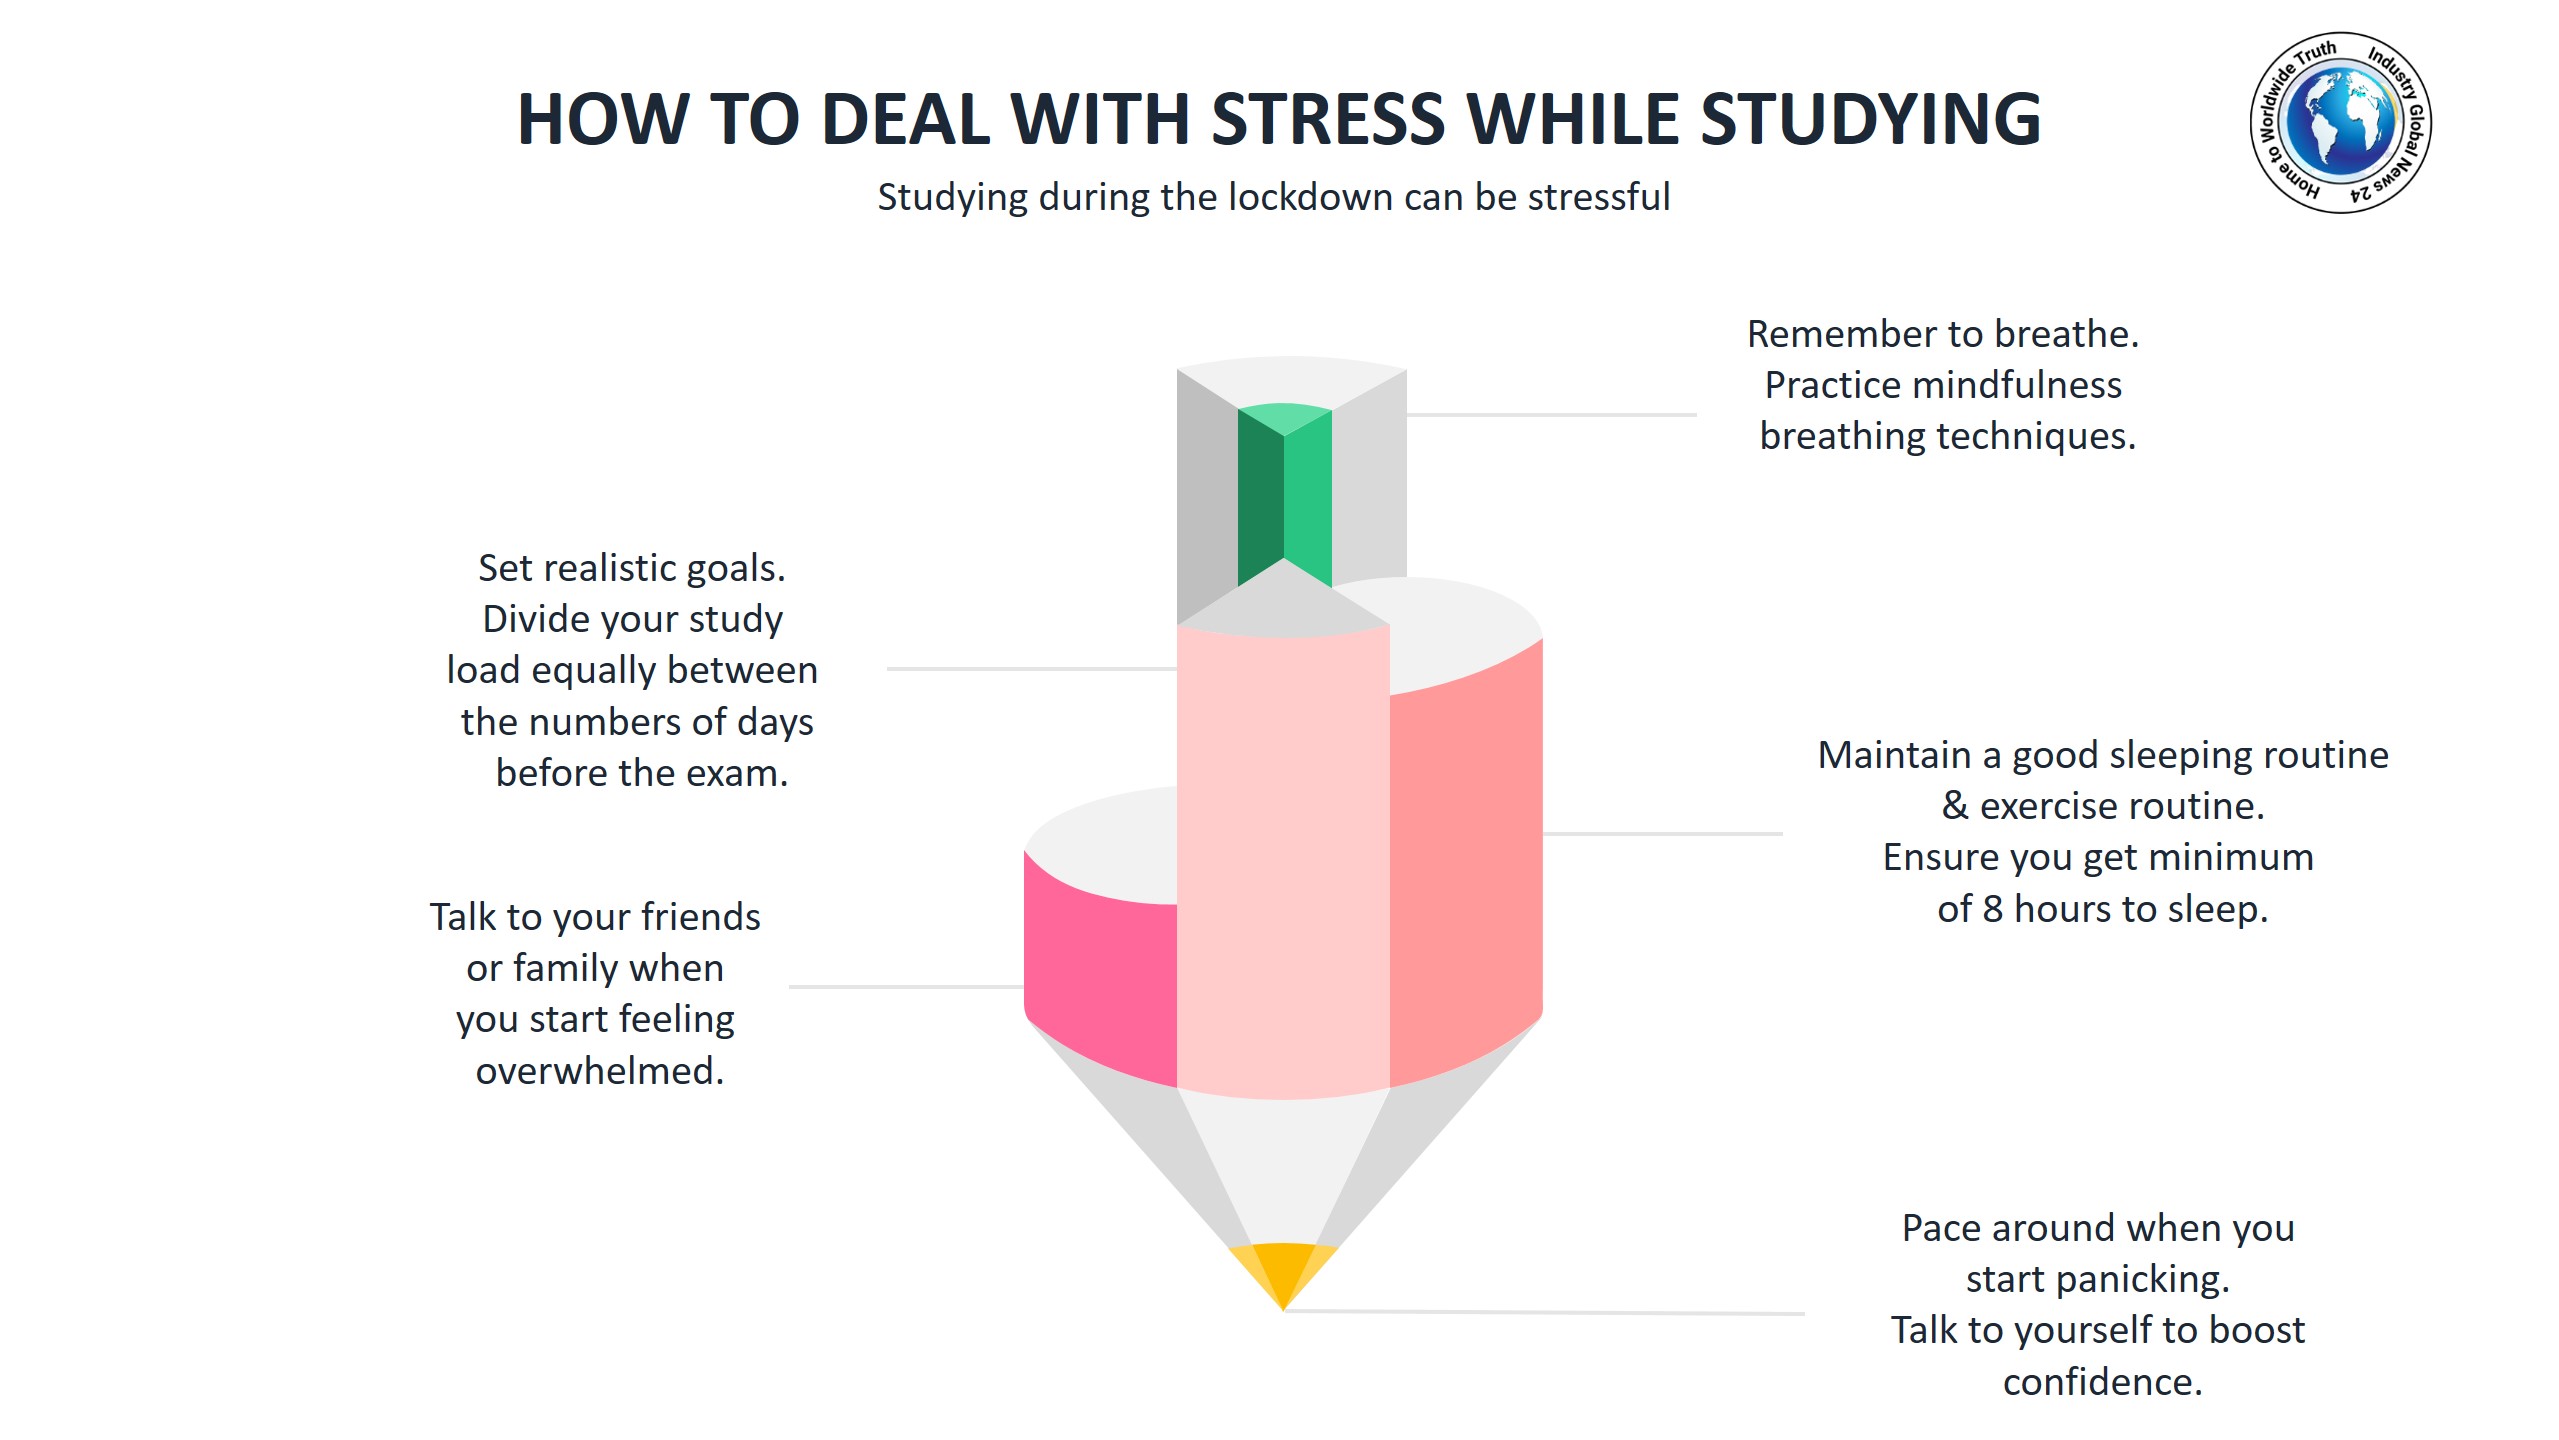 How to deal with stress while studying